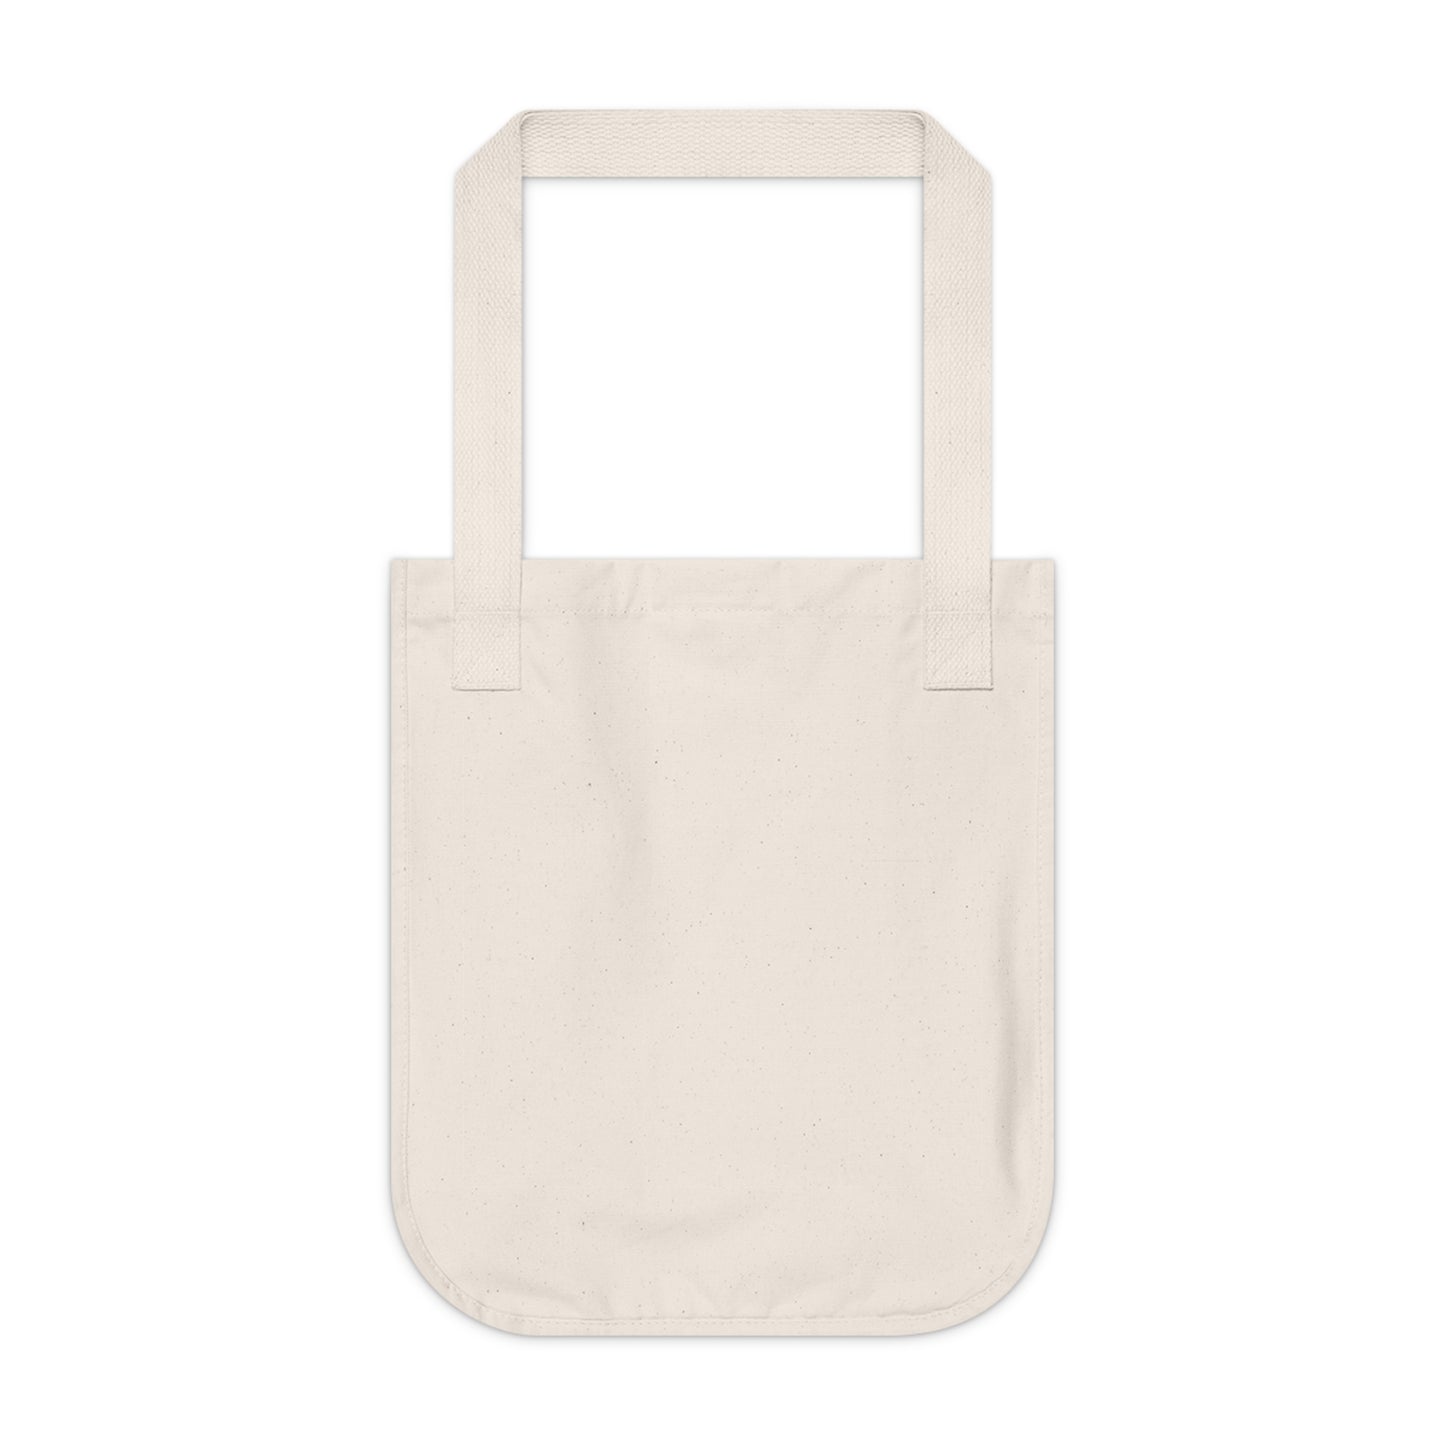 "Memories of My Childhood: A Photographic and Found Artifact Collage" - Bam Boo! Lifestyle Eco-friendly Tote Bag